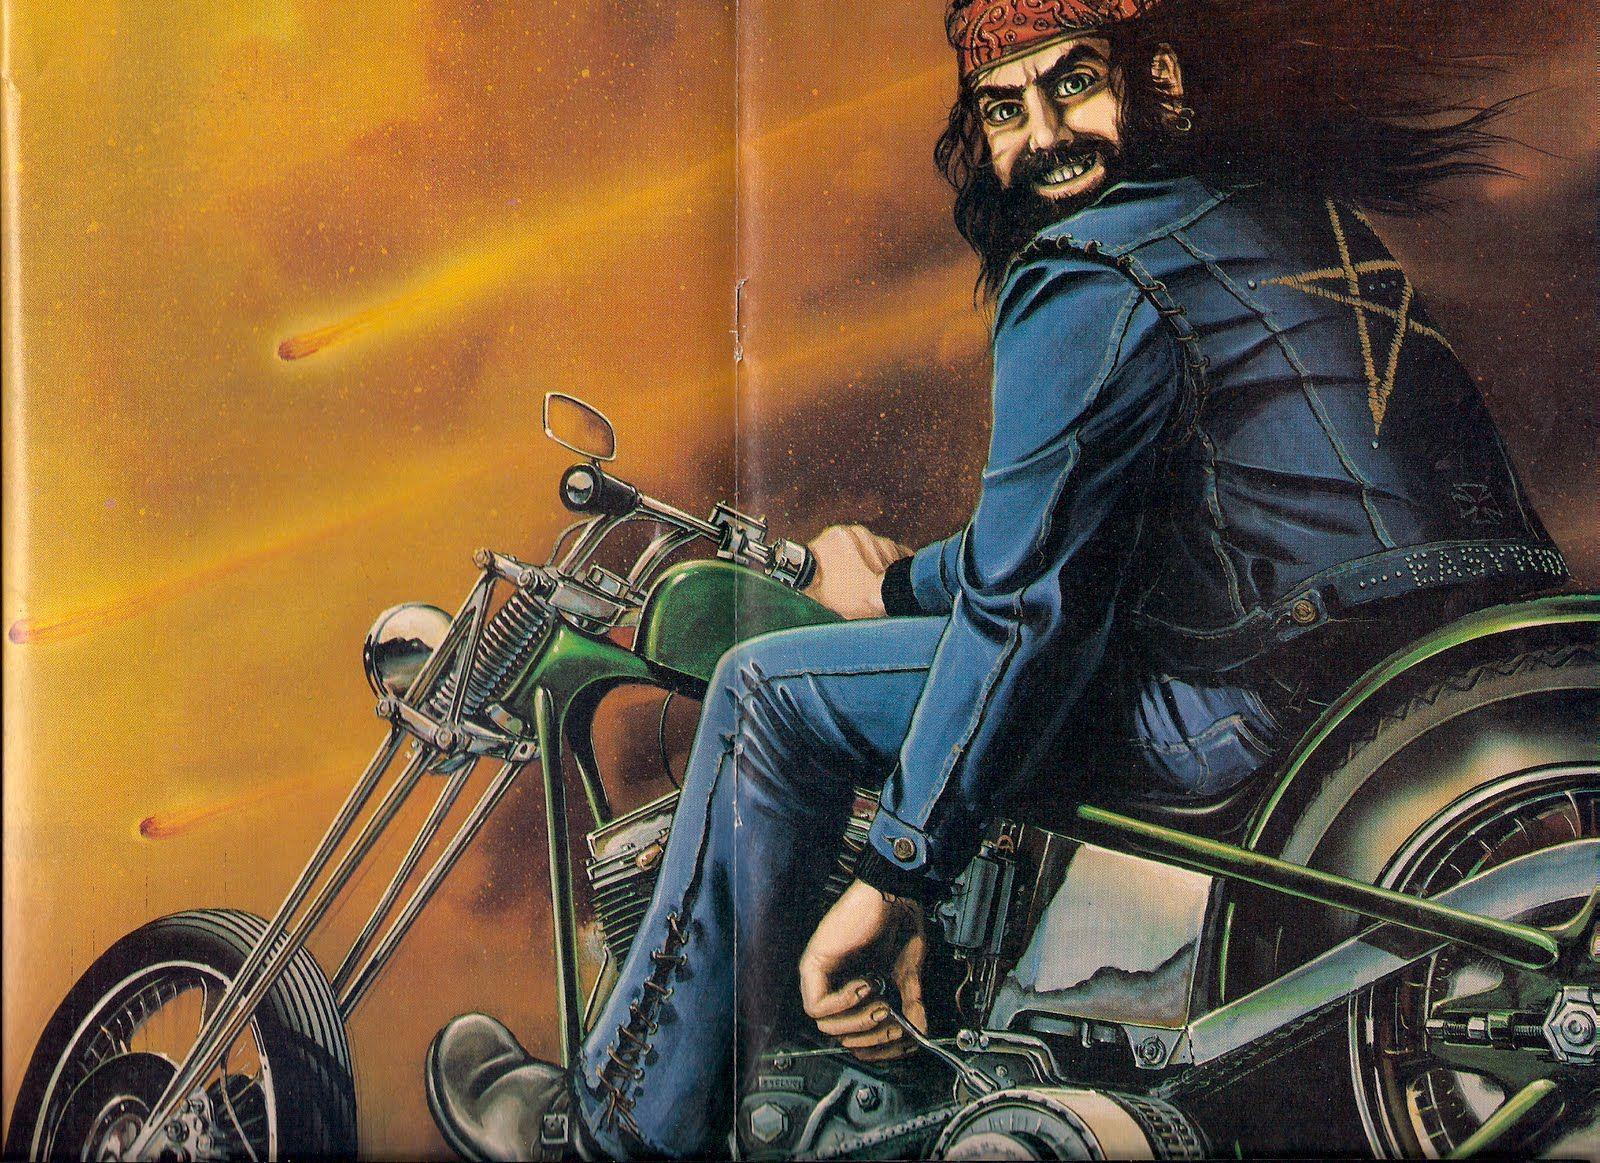 David Mann Wallpapers - Wallpaper Cave Easy Rider Magazine Posters.